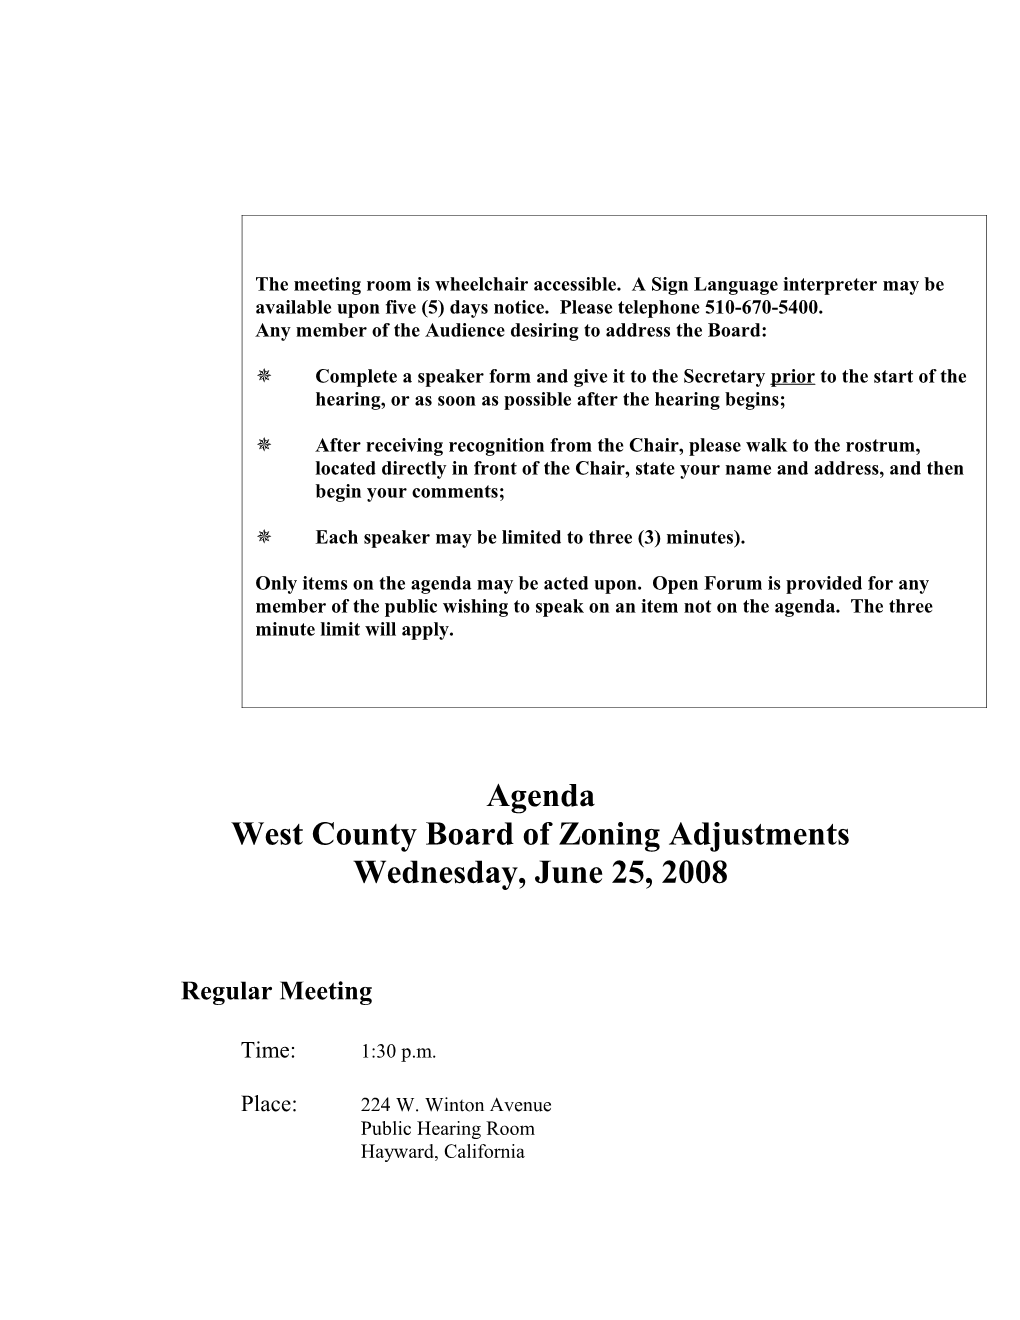 June 25, 2008West County Board of Zoning Adjustmentspage 1